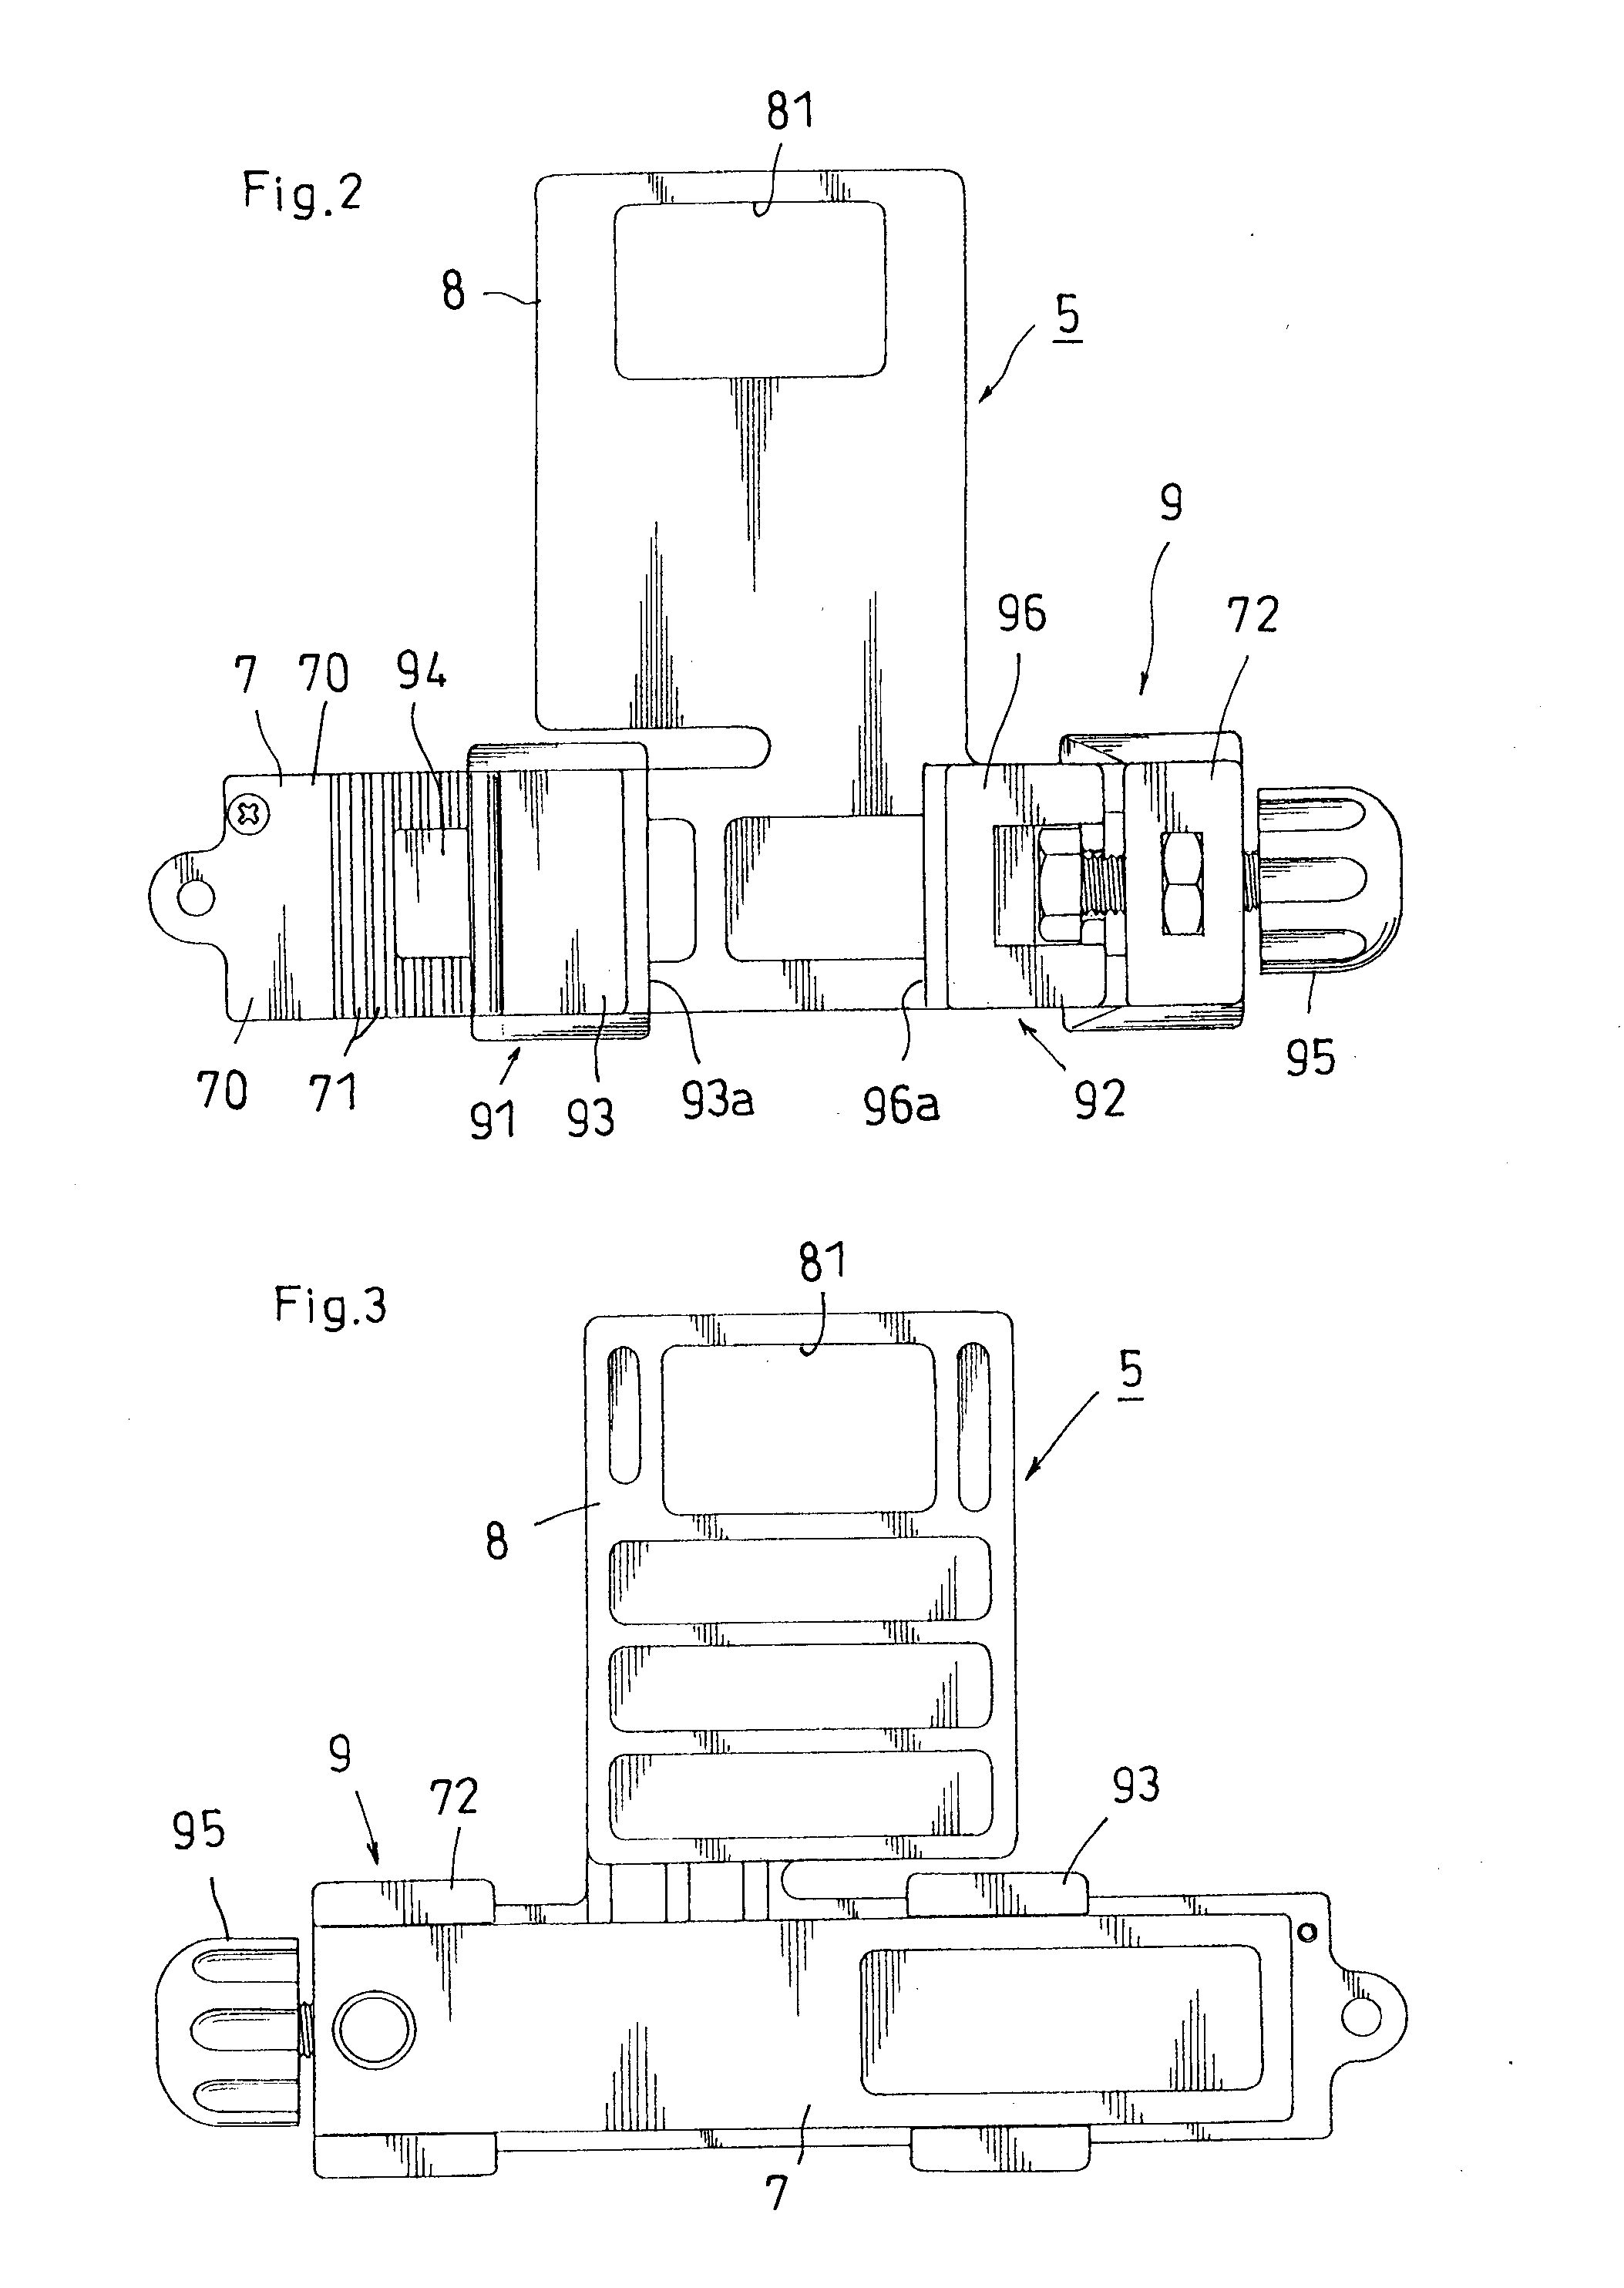 Supporting bracket for surveying instrument